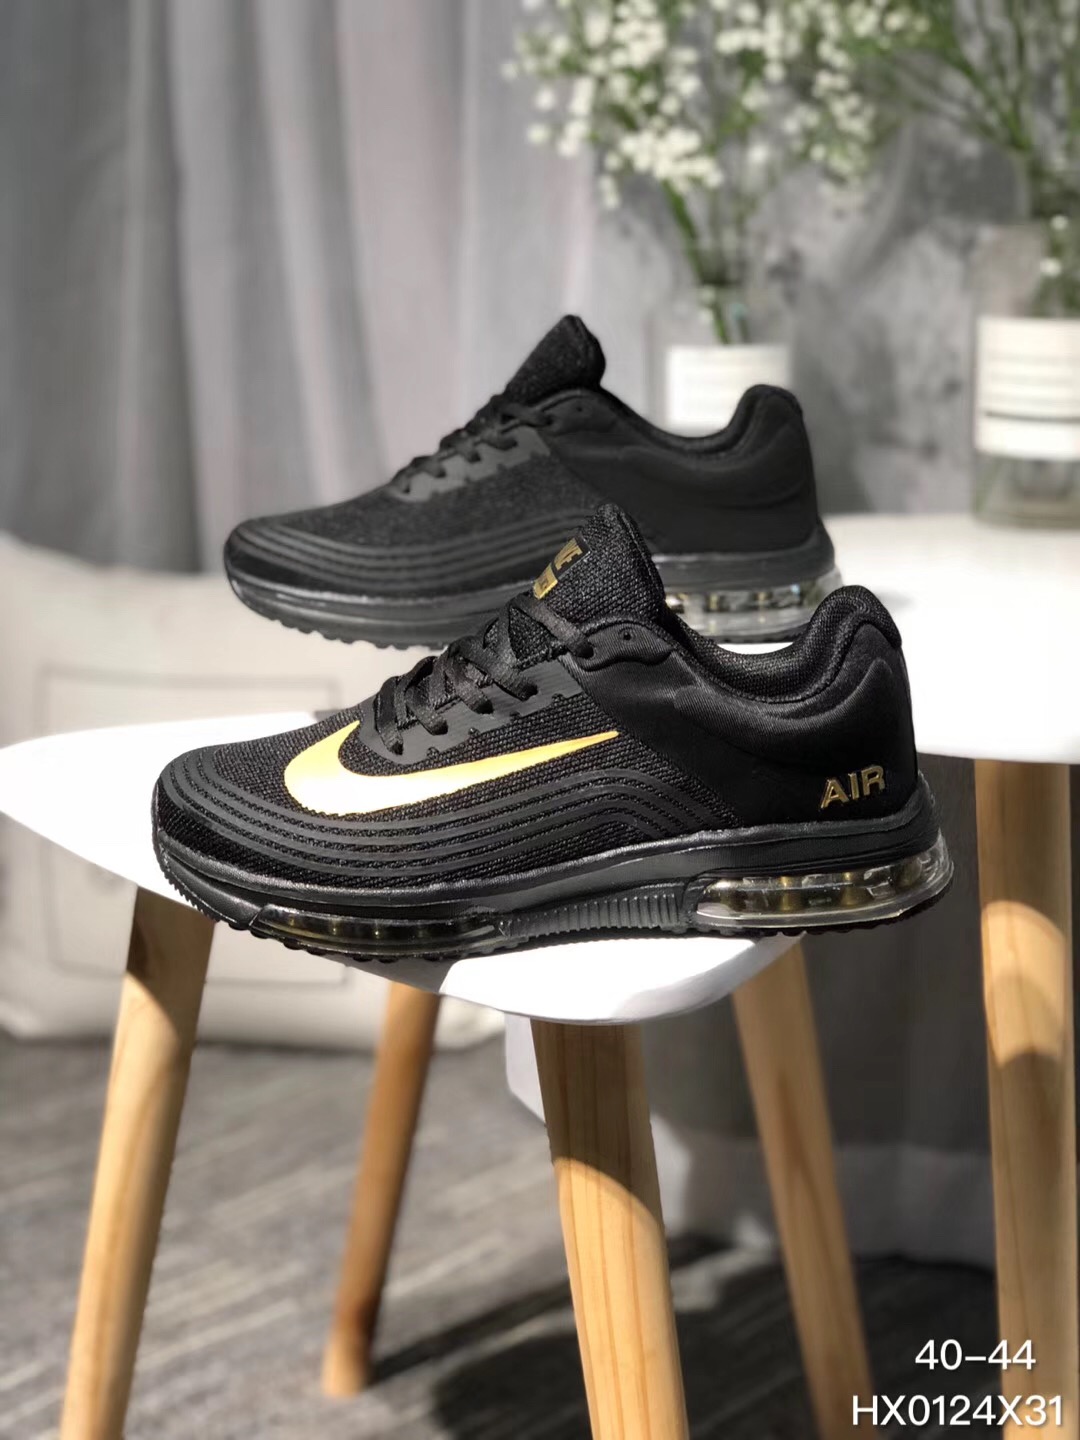 Nike Air Max 2018 Flyknit Black Gold Running Shoes